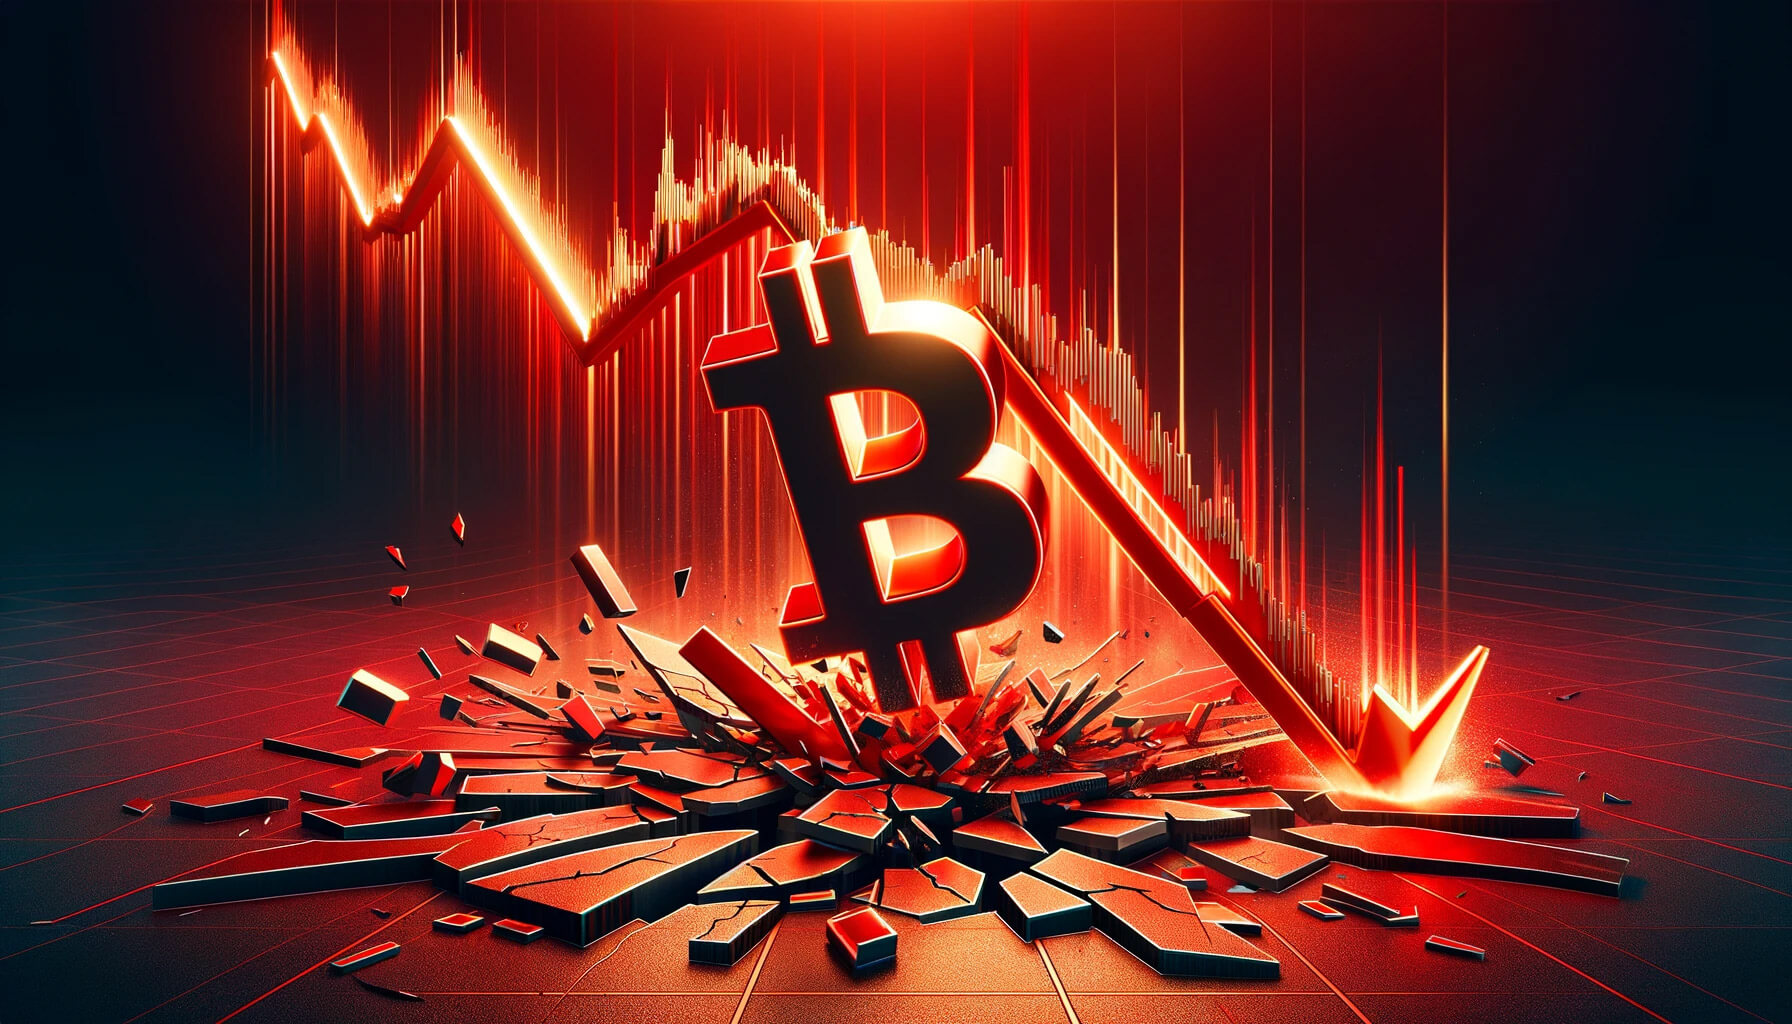 Bitcoin’s crash to k causes meltdown for alts